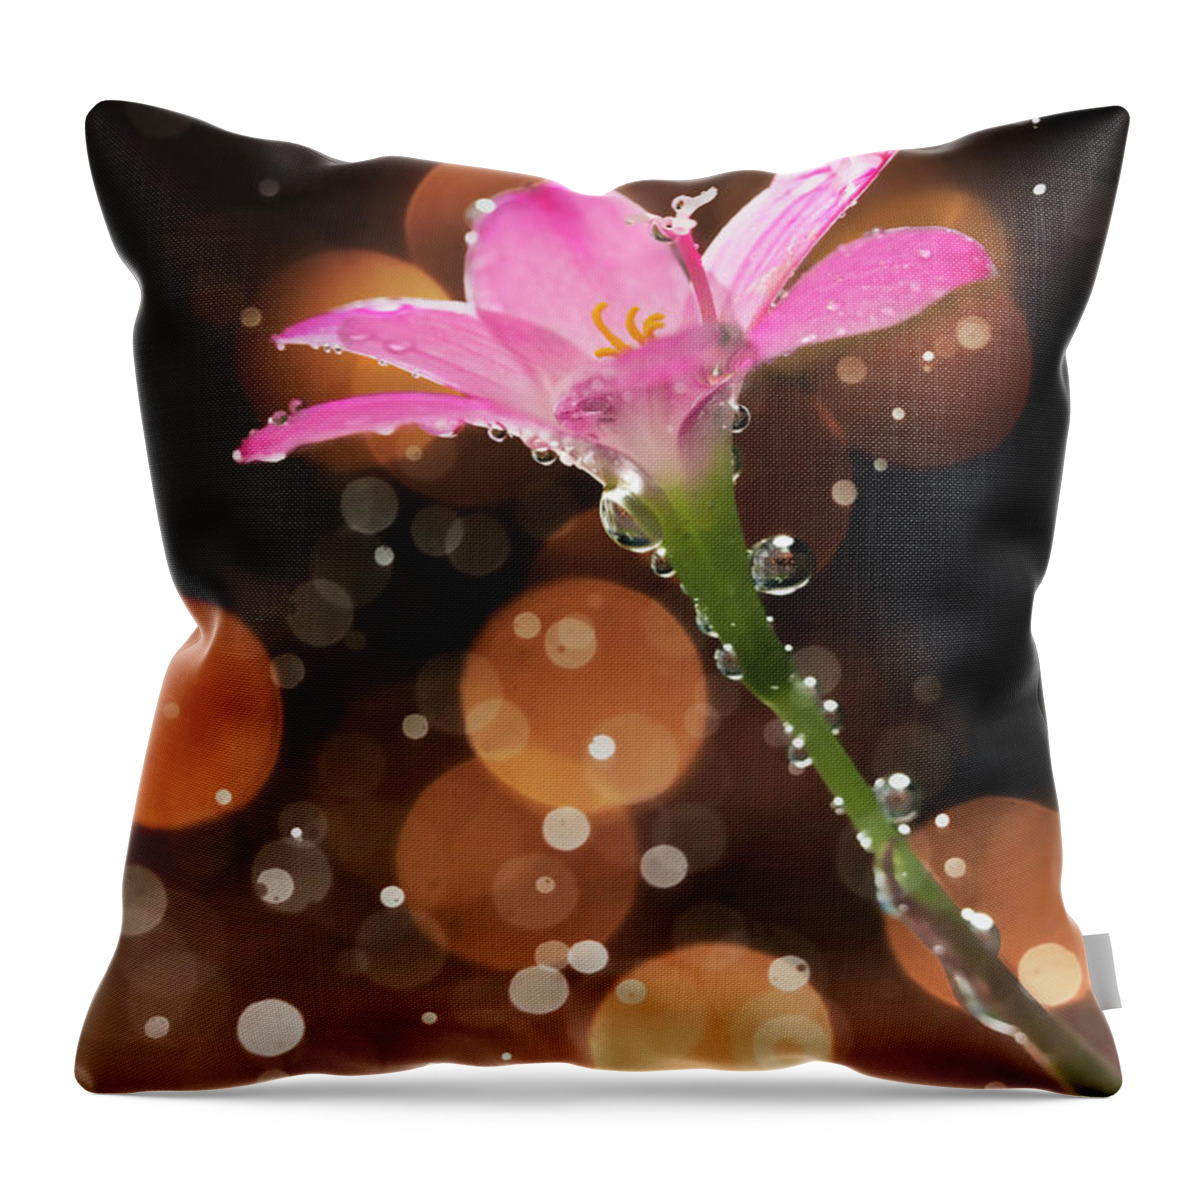 Tanzania Throw Pillow featuring the photograph Isolated Pink Flowers With Fizzy Bubbles by Twomeows